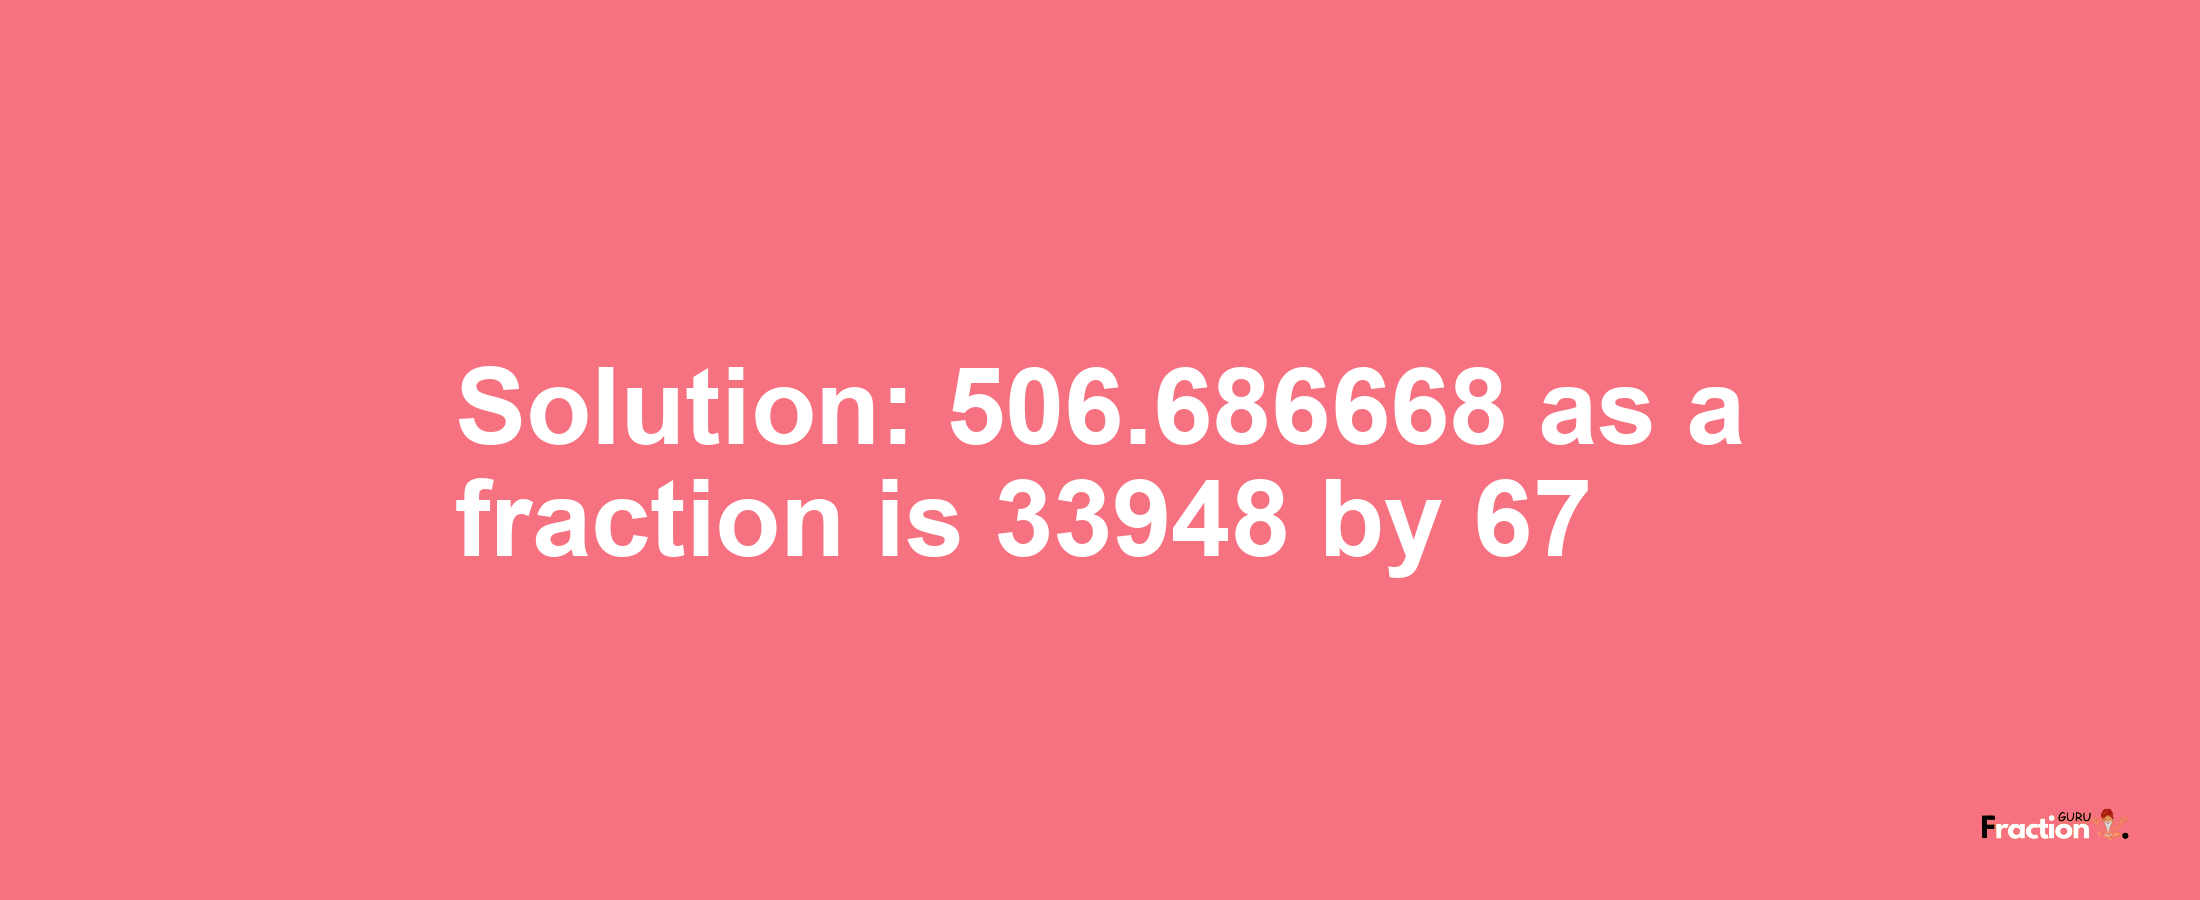 Solution:506.686668 as a fraction is 33948/67